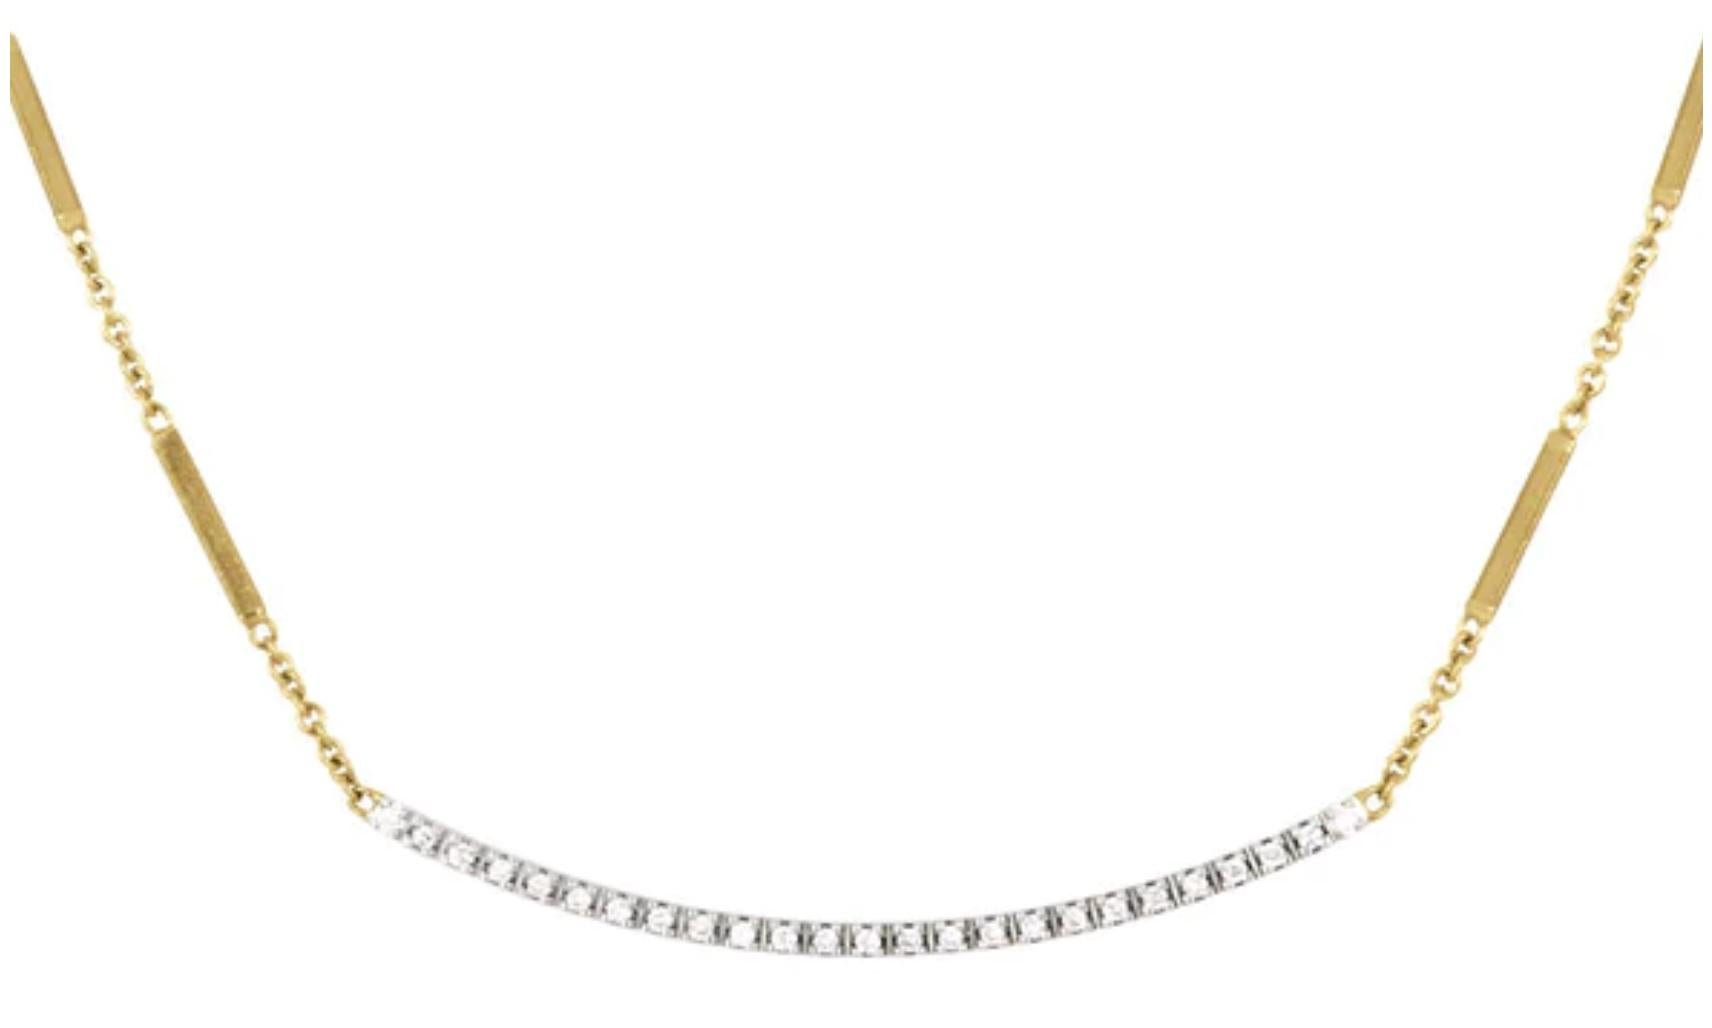 Brand new 18K gold necklace with diamond bar.  Tags are still on necklace!  Retails for $2870.00!  16 Inches long.  CT 0.19.  Diamonds are set in a white gold 18K bar. Its style is clean and minimalist  inspired by the idyllic and white beaches of